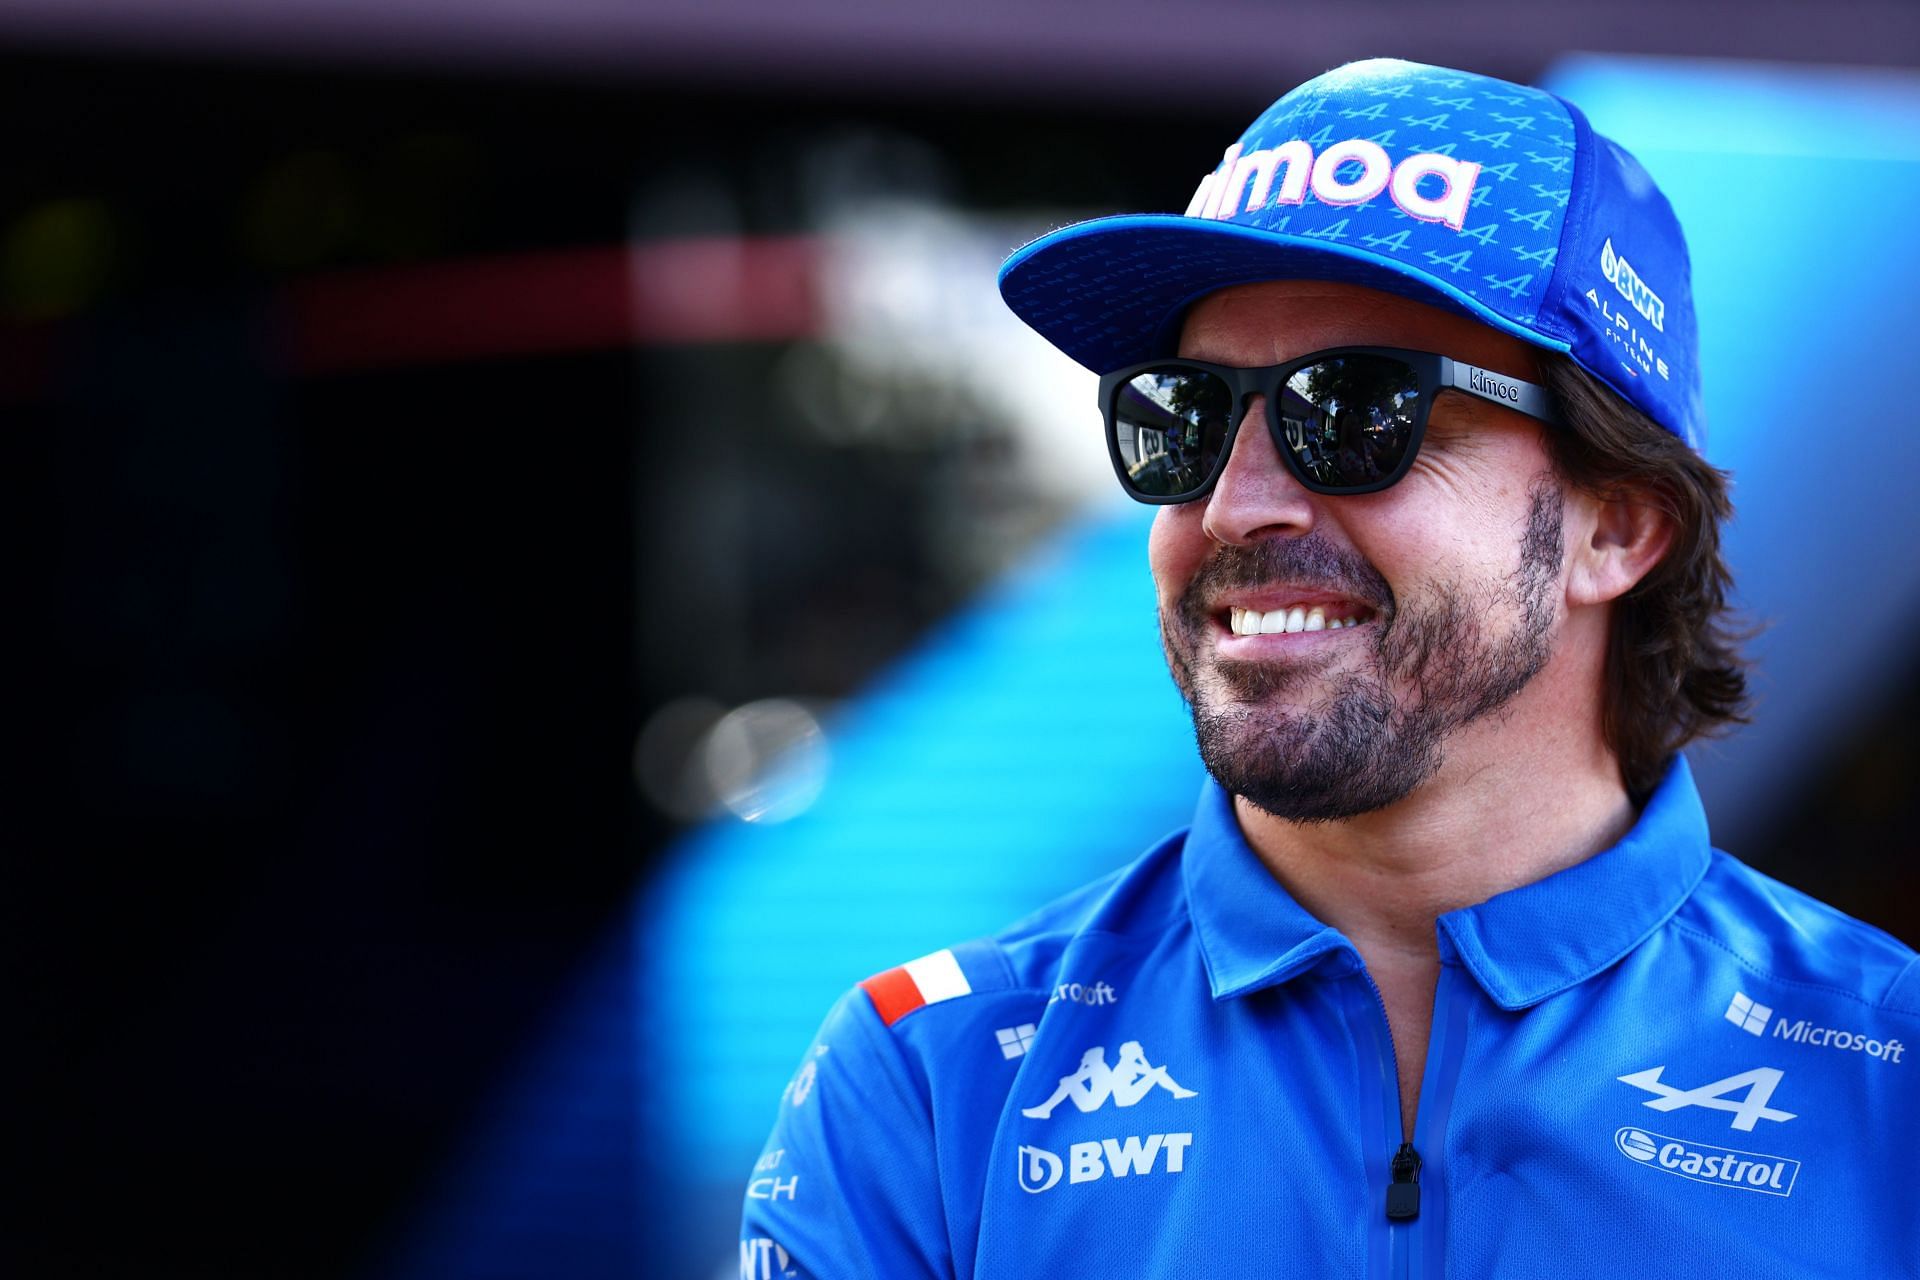 Fernando Alonso in the Paddock during previews ahead of the F1 Grand Prix of Australia (Photo by Mark Thompson/Getty Images)